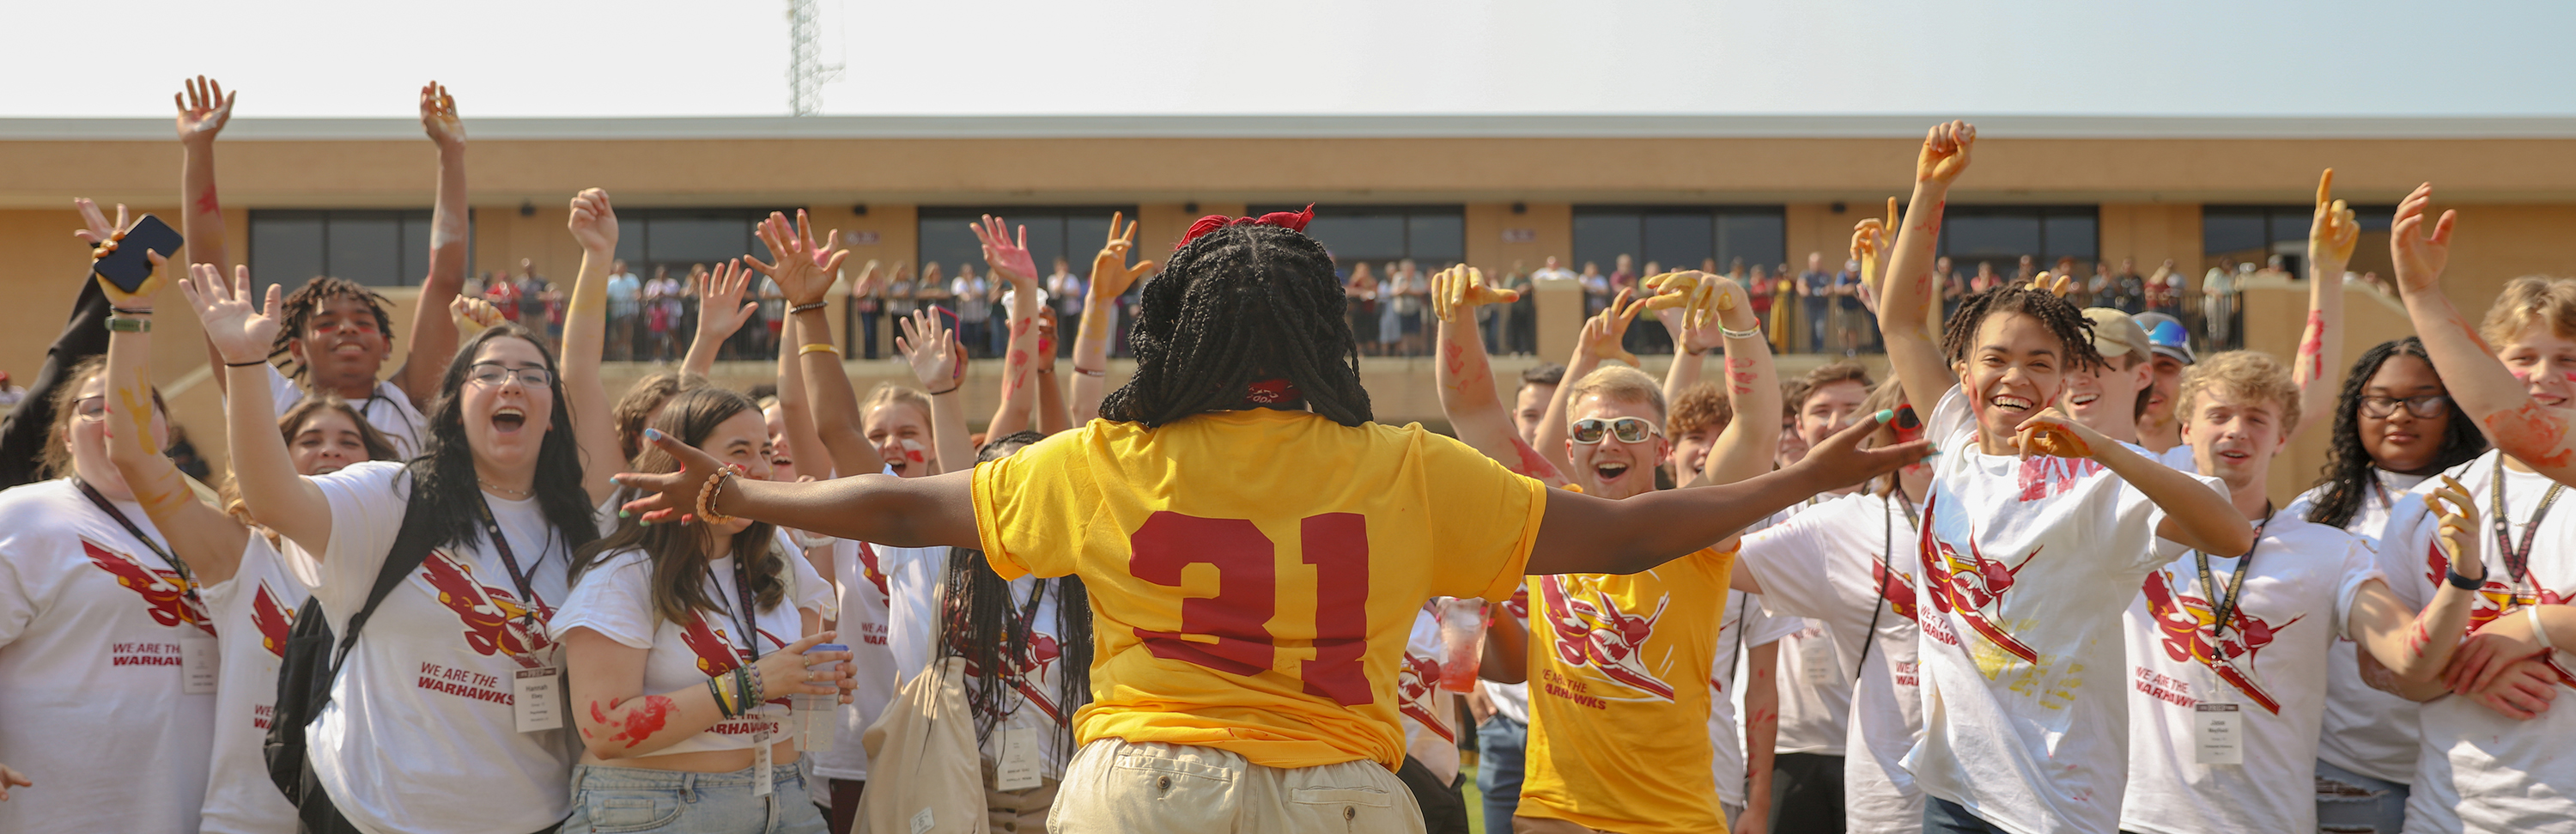 A woman's back is to the camera. She wears a gold jersey with 31 on the back. Her arms are raised and there is a crowd of people cheering facing her.